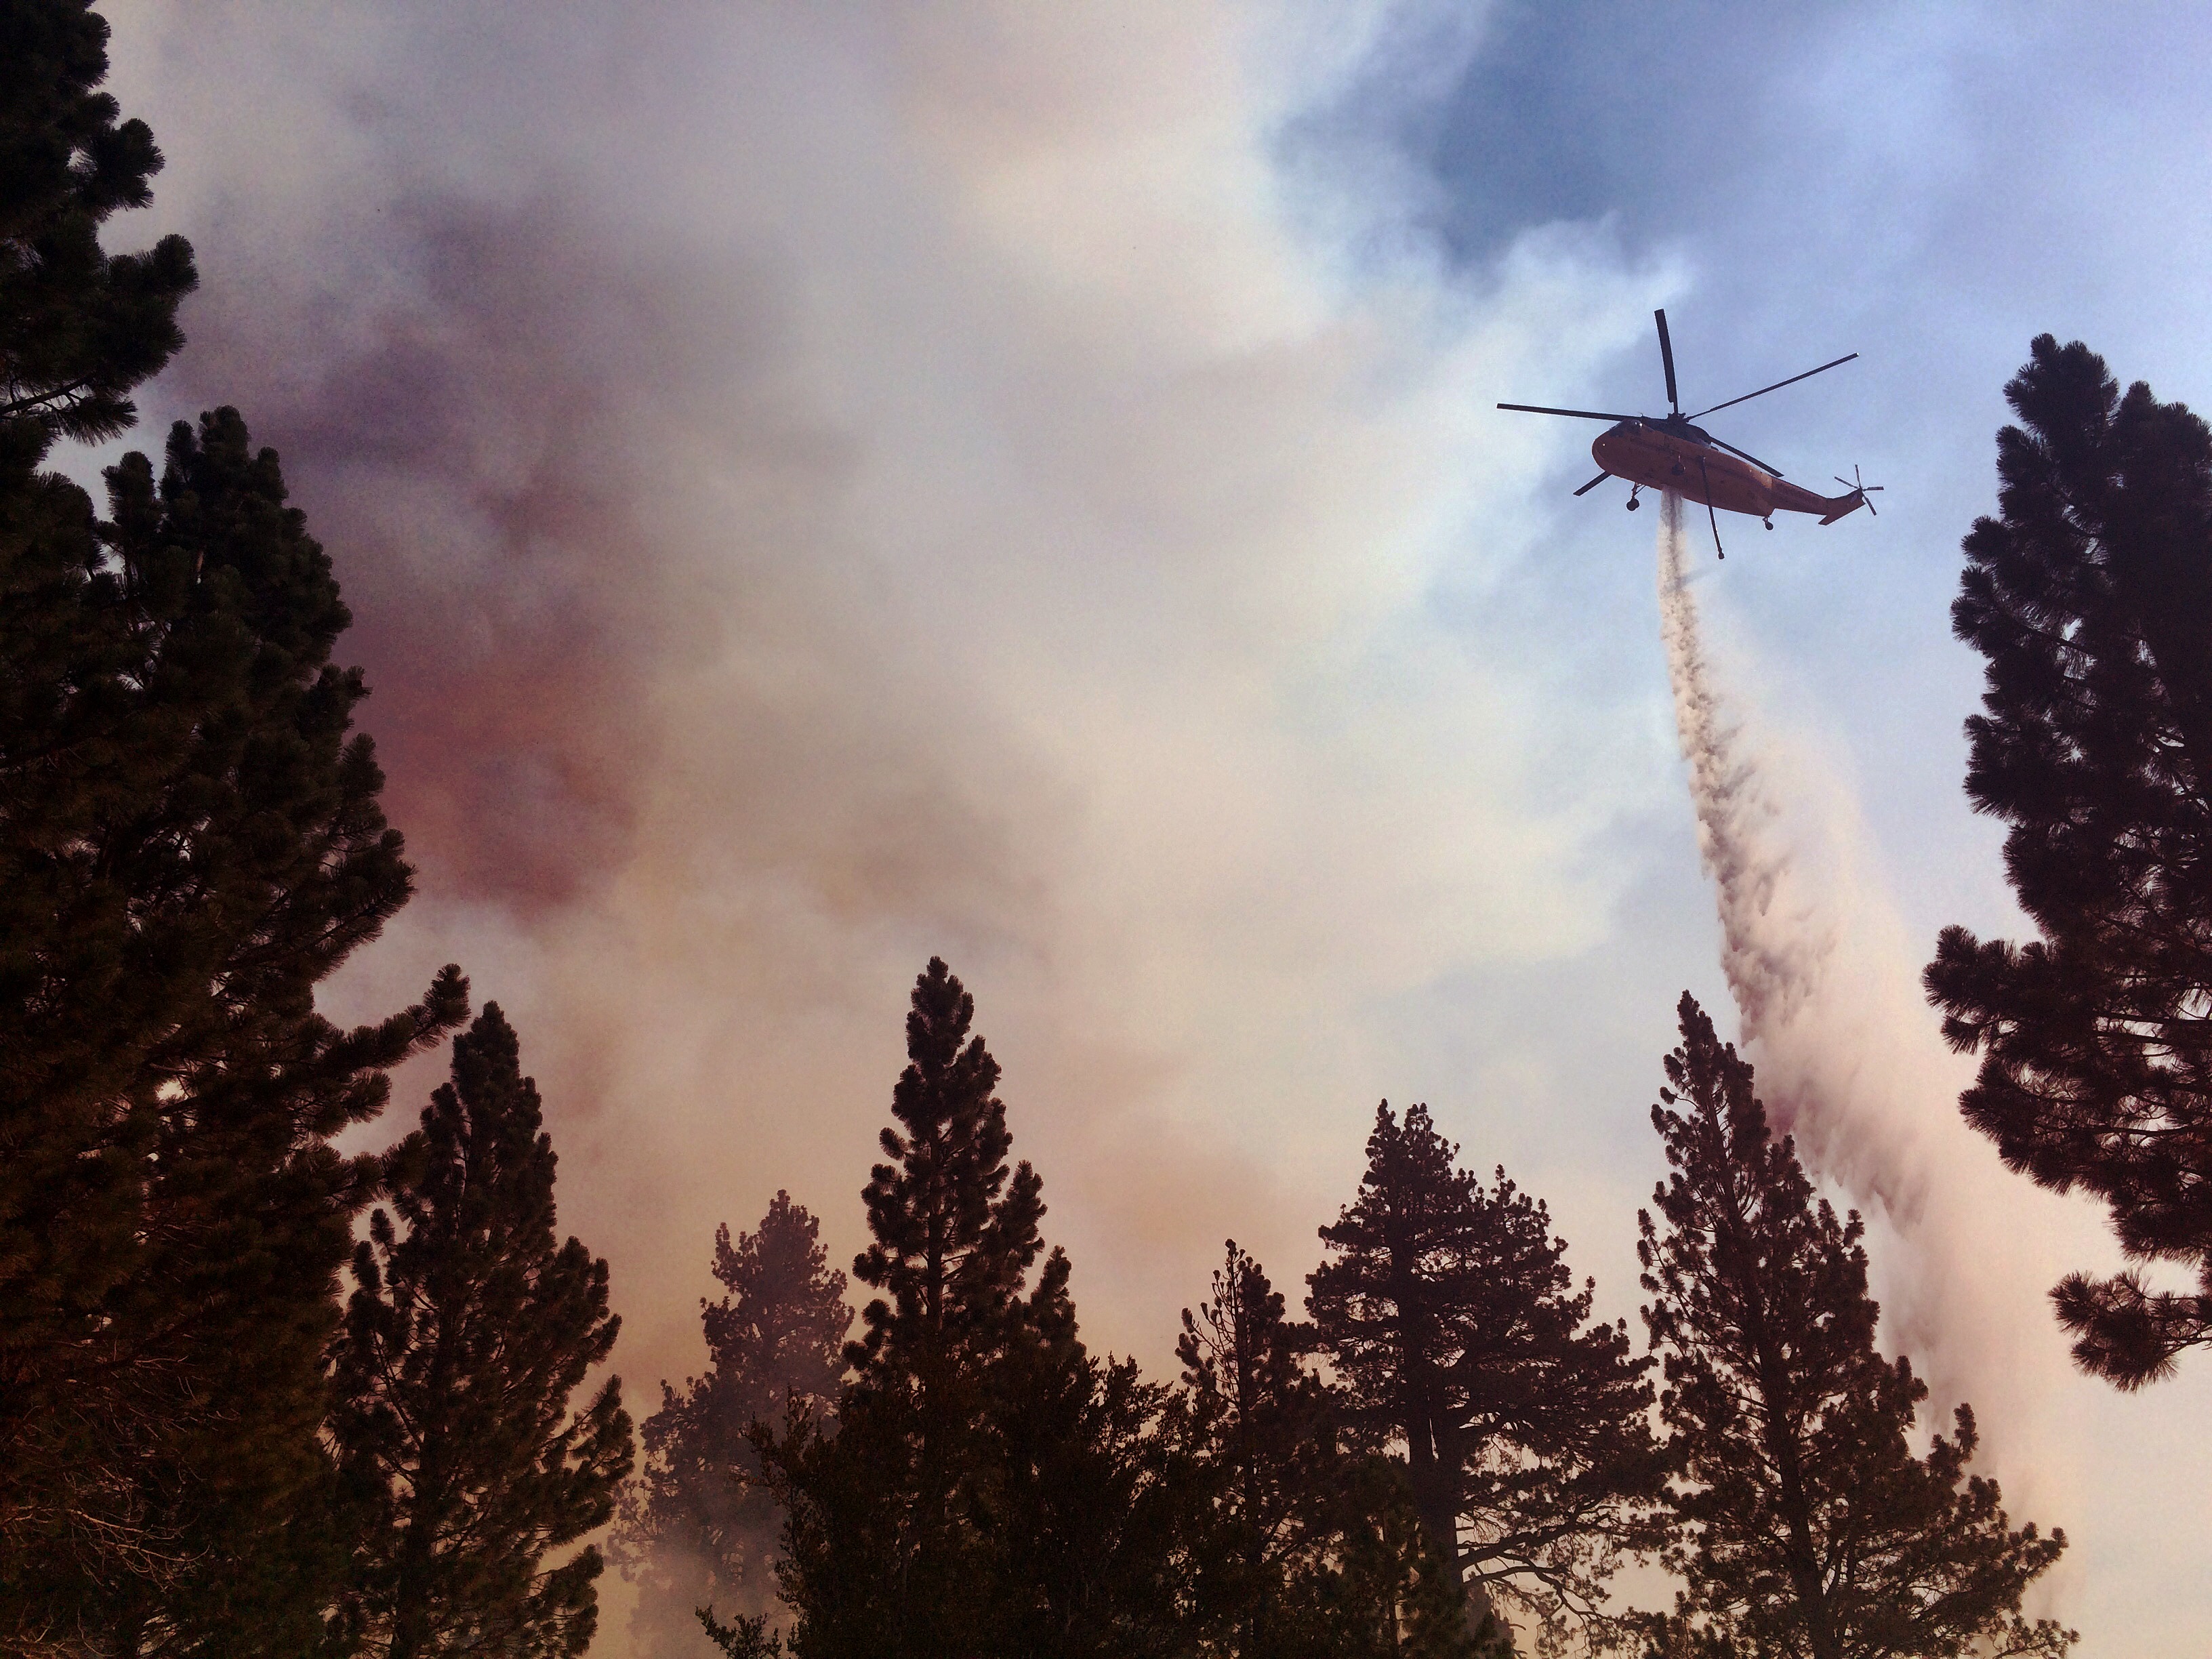 Helicopter fighting wildland fire from the air. Photo taken by ExpertVoice Expert Gregg Boydston.